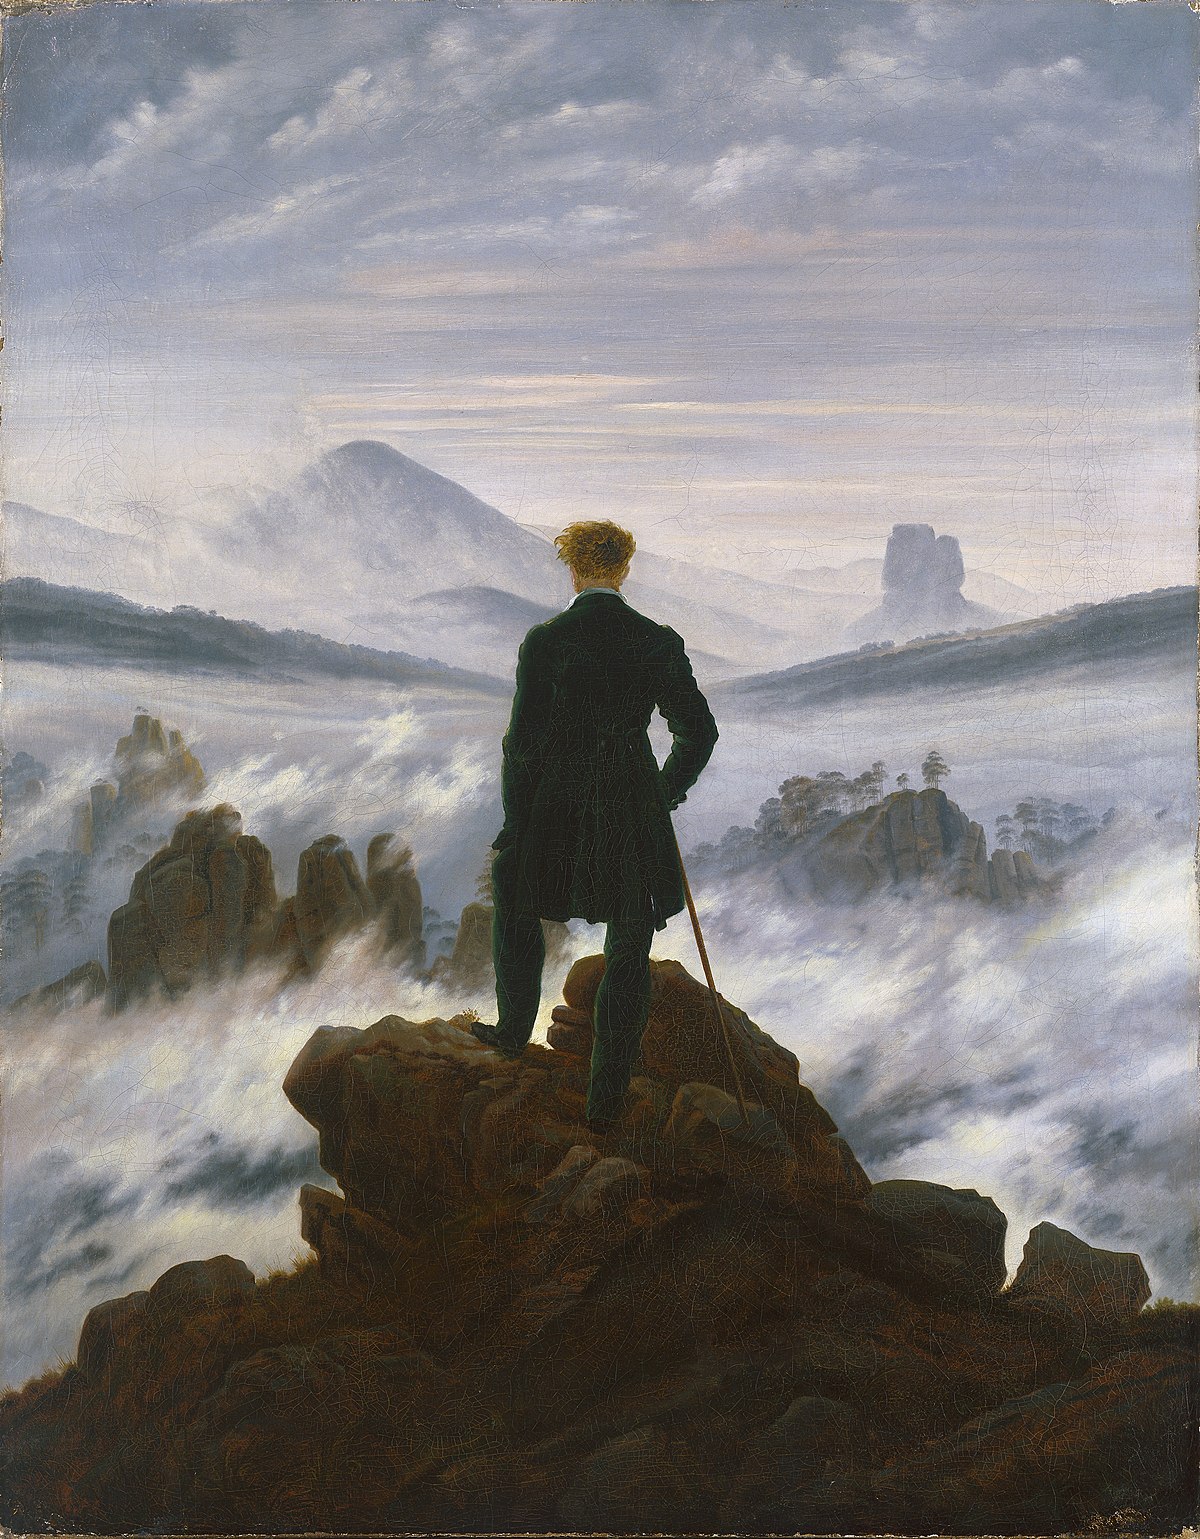 A person standing on a clifftop overlooking a vast and unknown landscape.